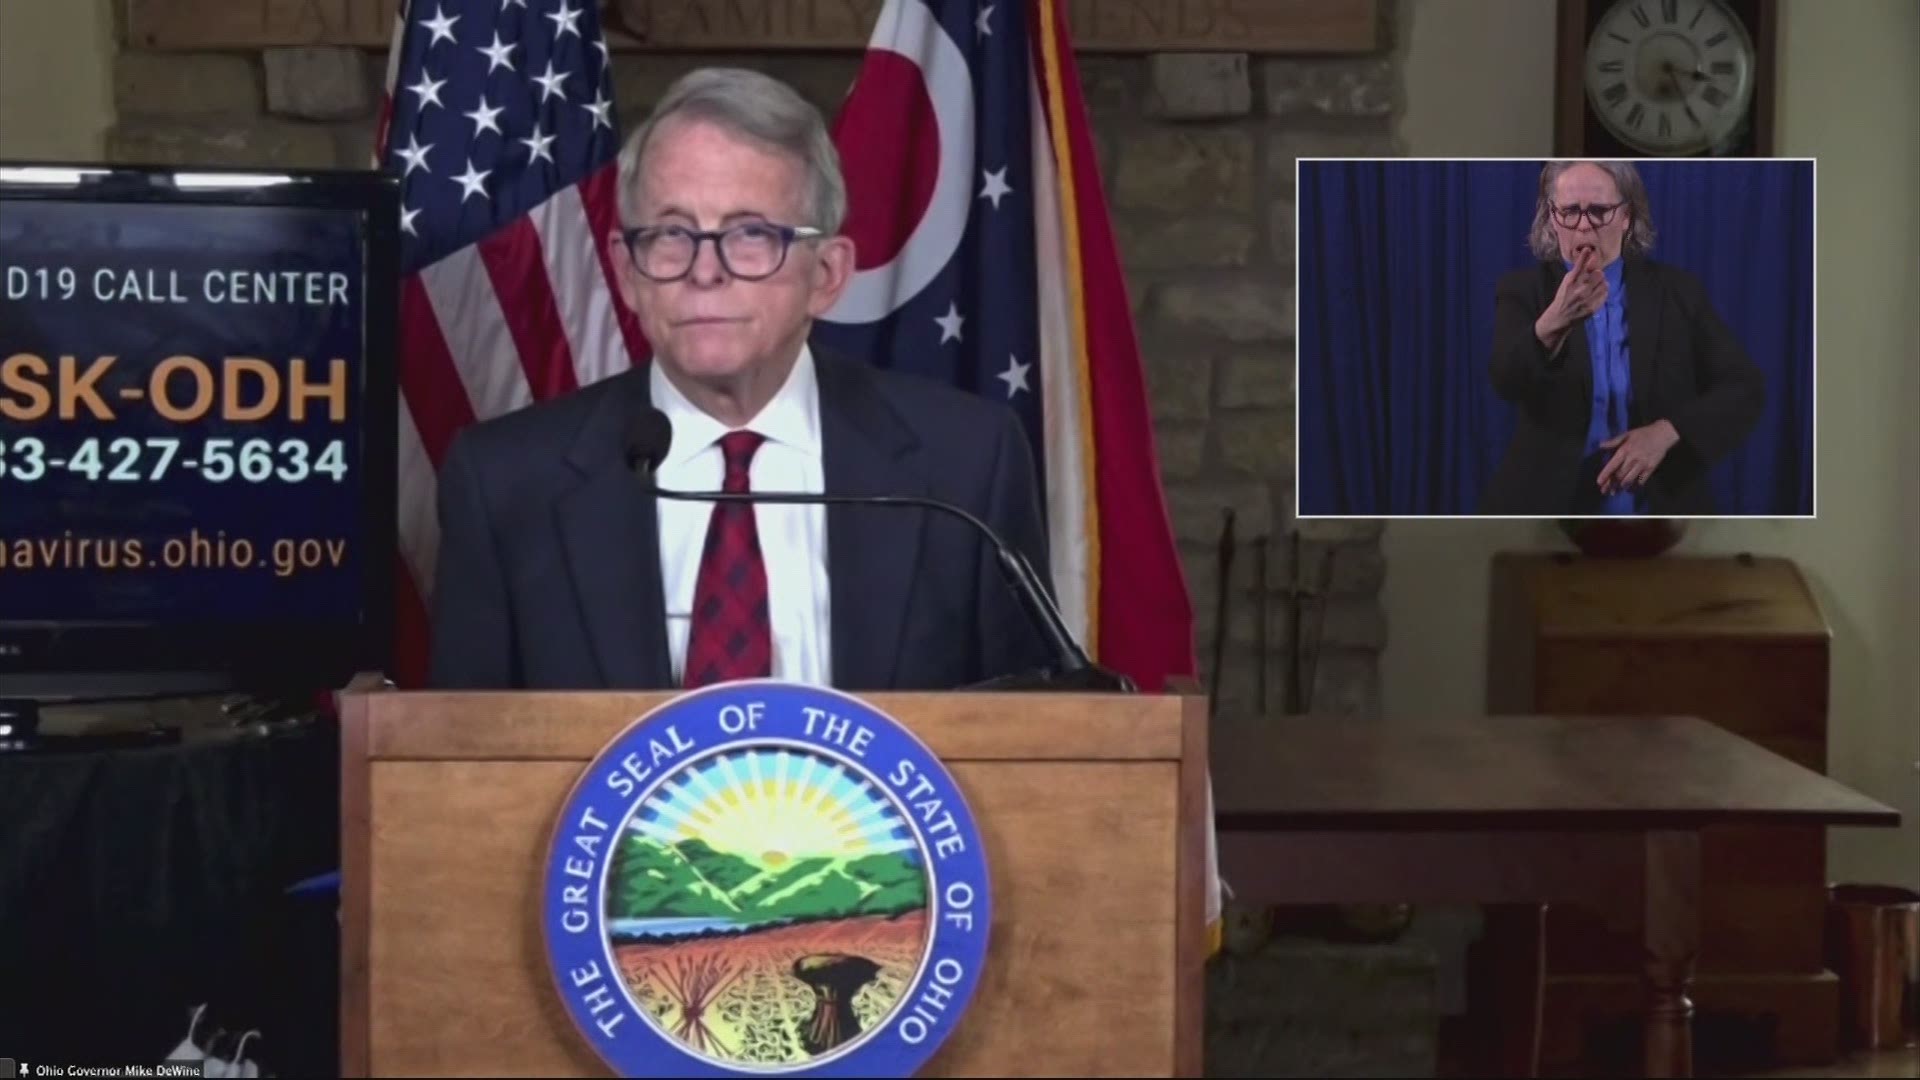 Gov. DeWine said Ohioans need to be their guard up even though the COVID-19 vaccine has arrived.